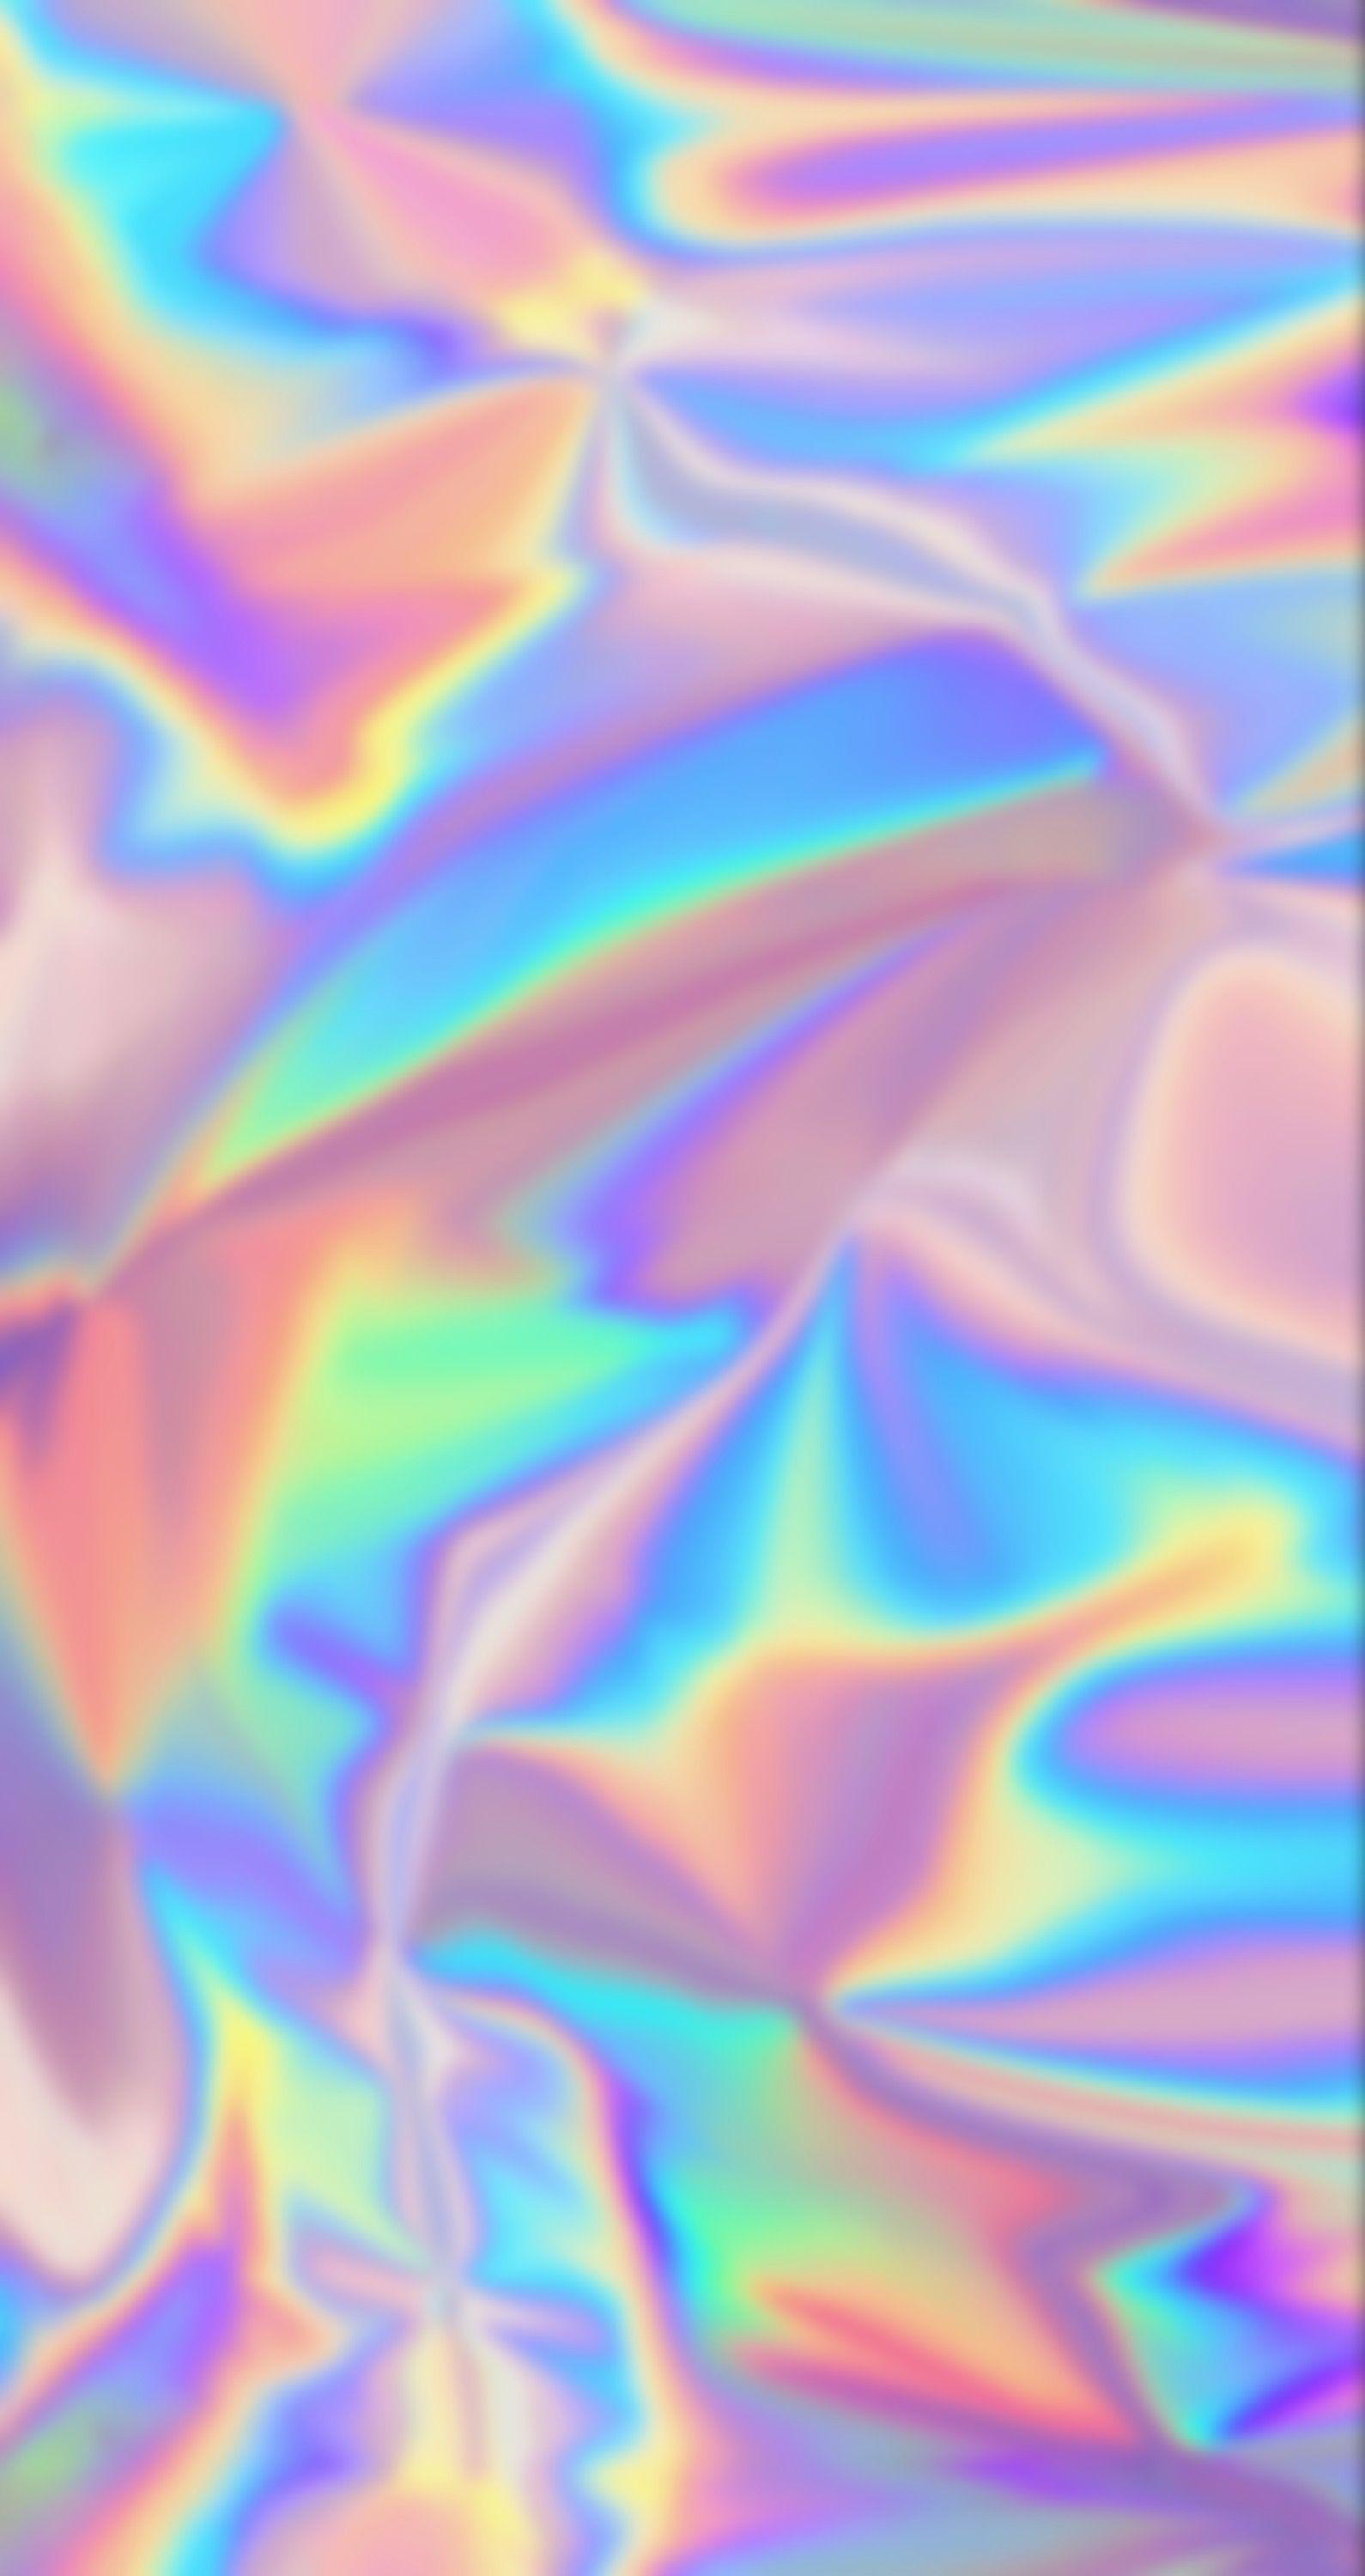 A holographic background with a rainbow of colors. - Holographic